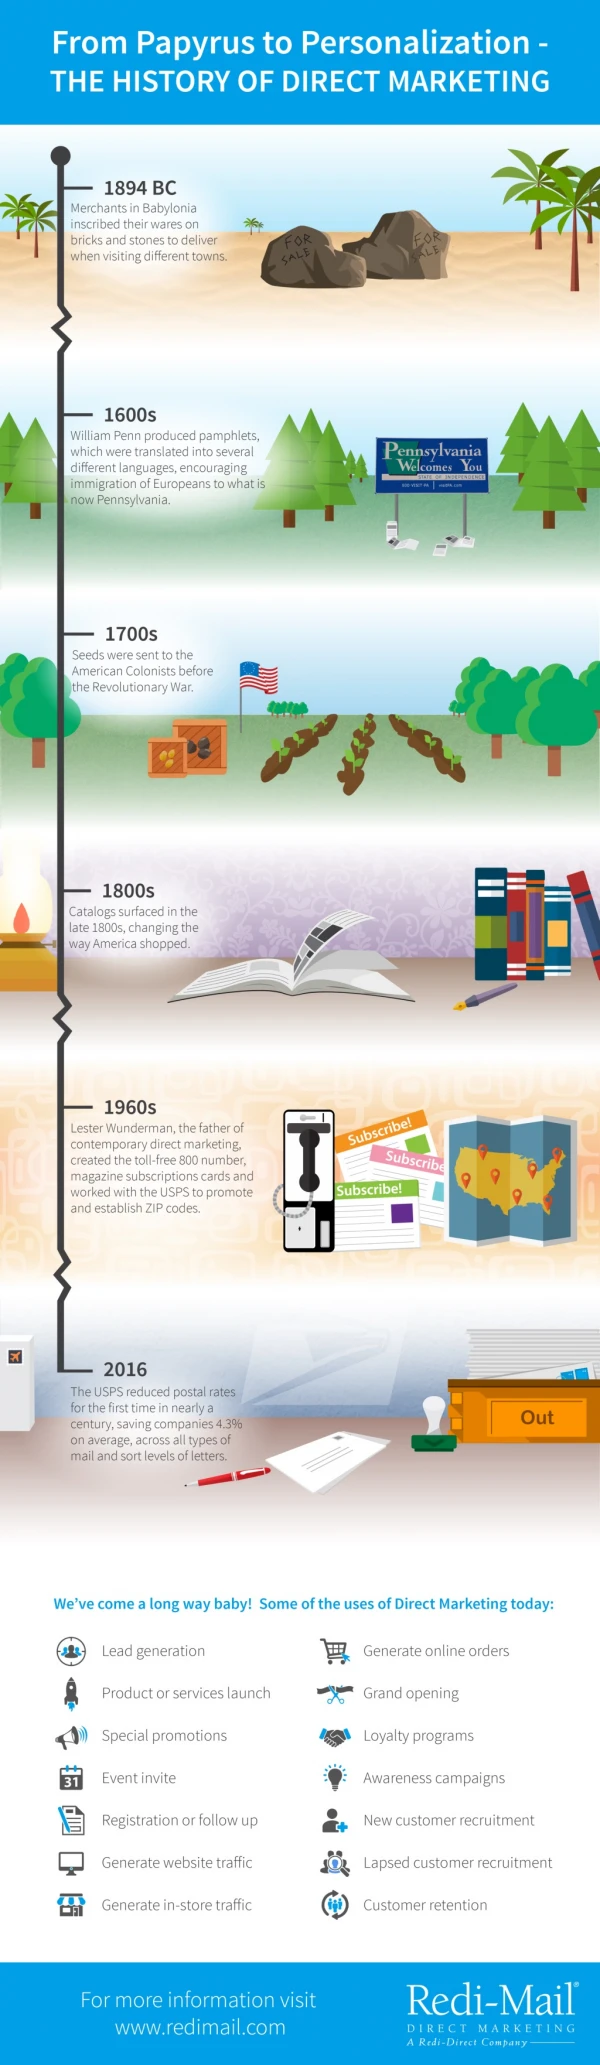 From Papyrus to Personalization A fun look back at the history of direct marketing....